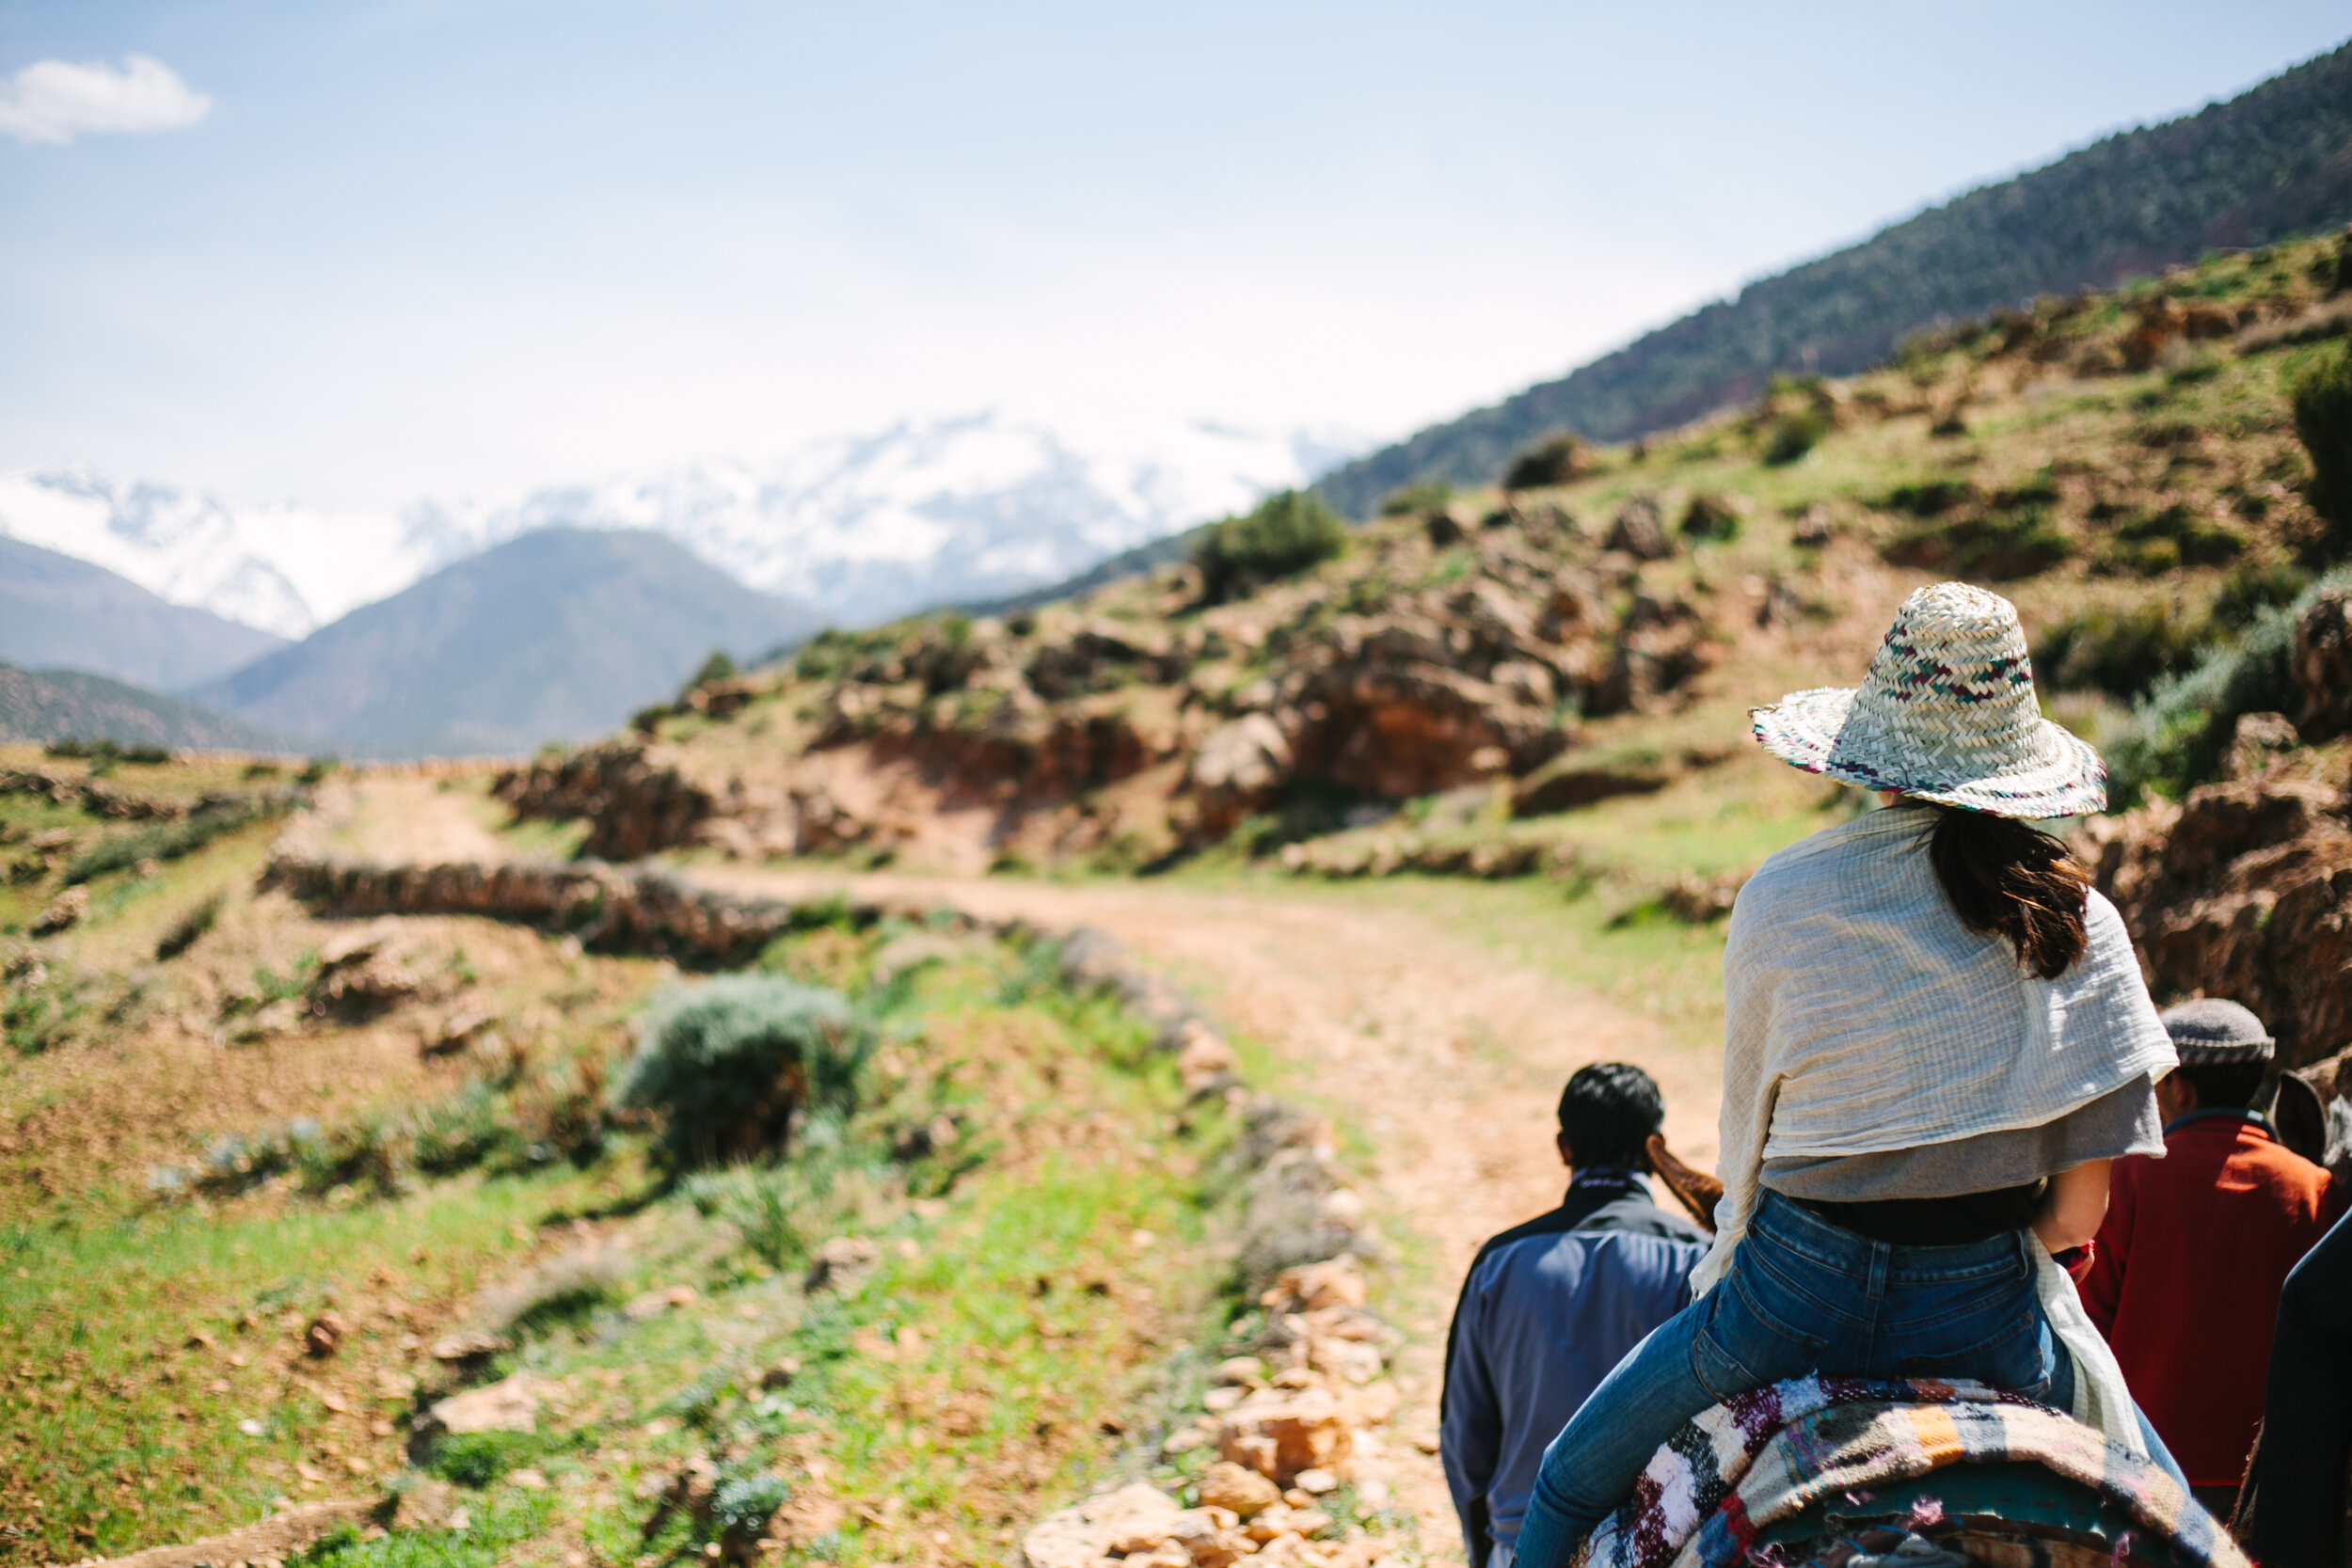  A mule trek in the Atlas Mountains of Morocco on a yoga retreat 